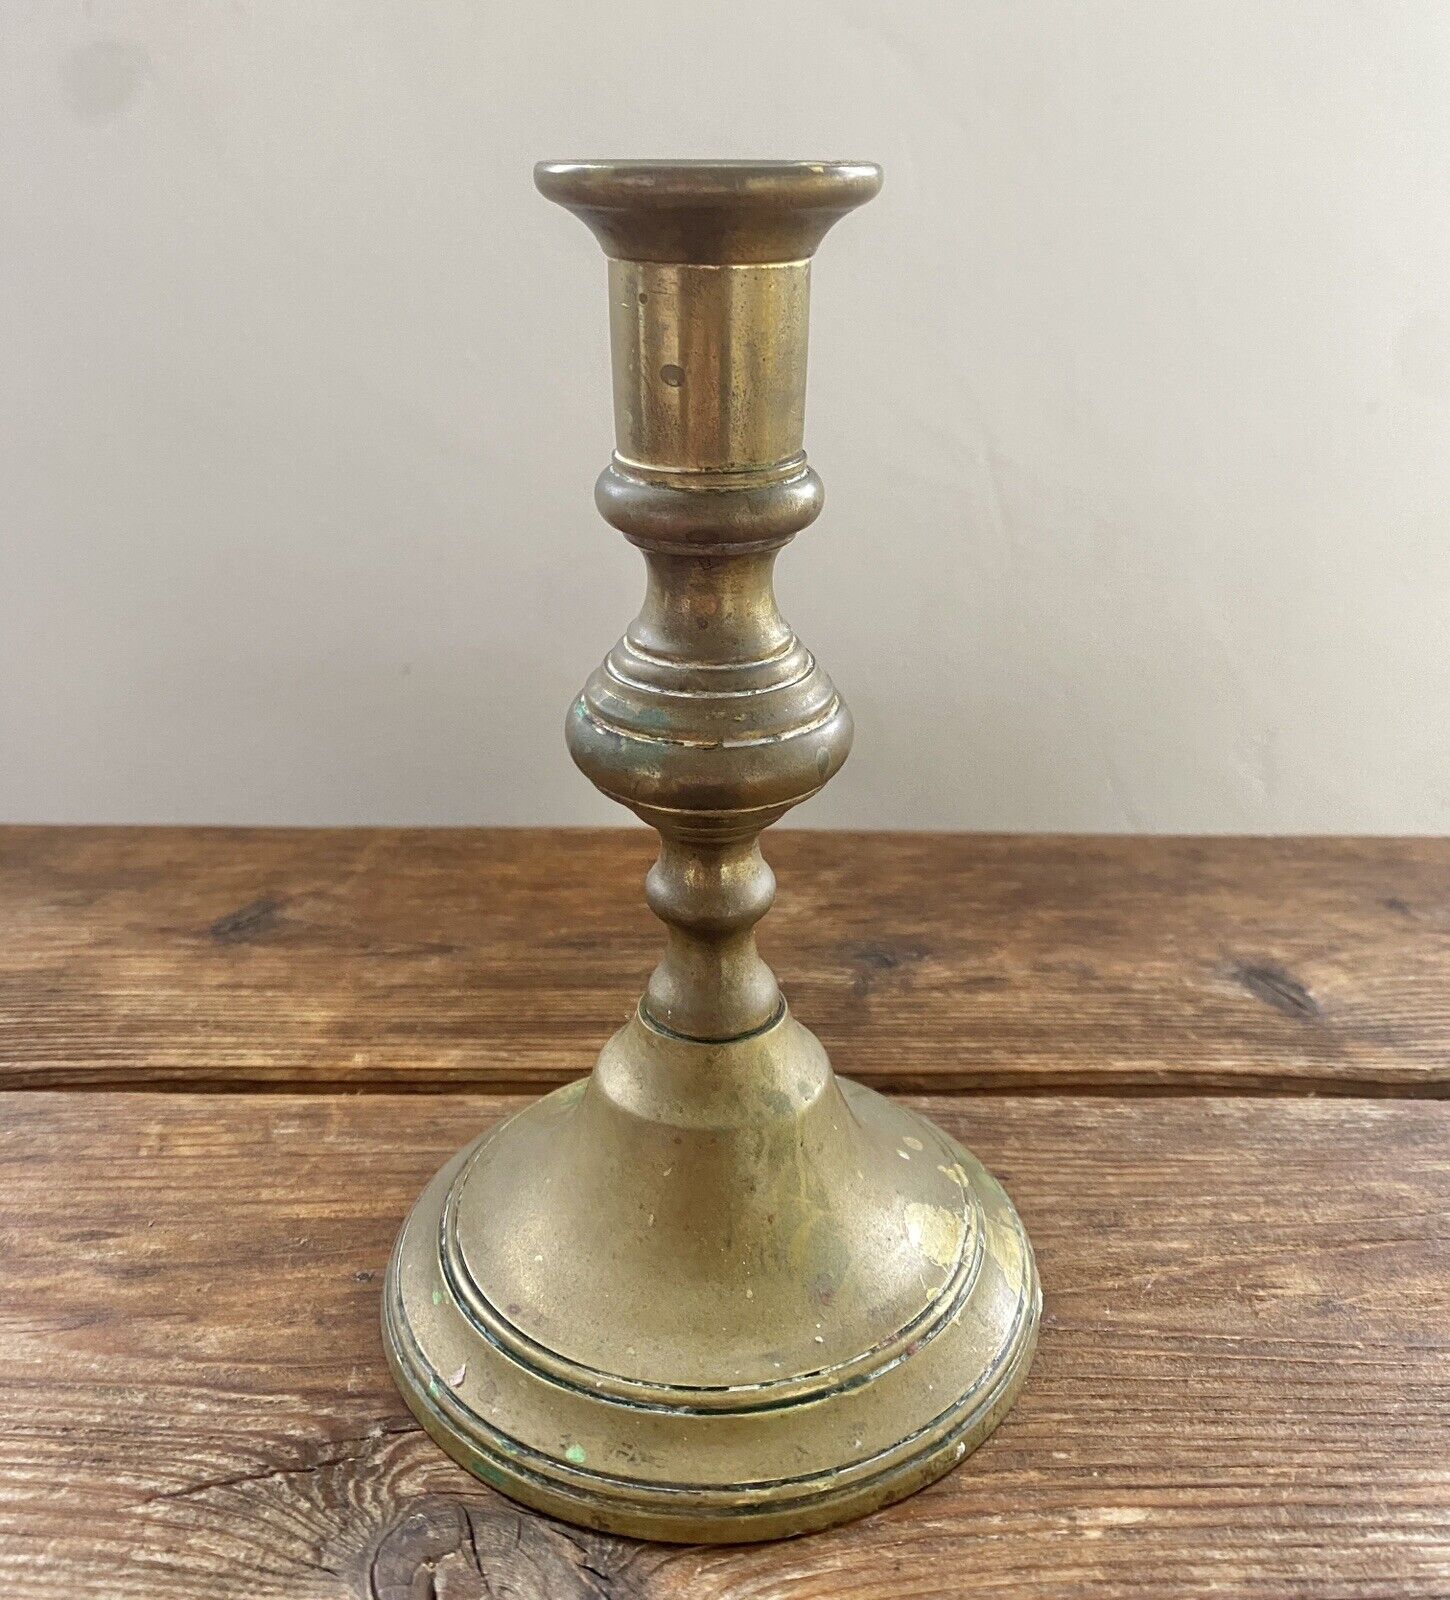 Antique ROSTAND Heavy Brass Taper Dinner Candle Stick Holder 6.5”